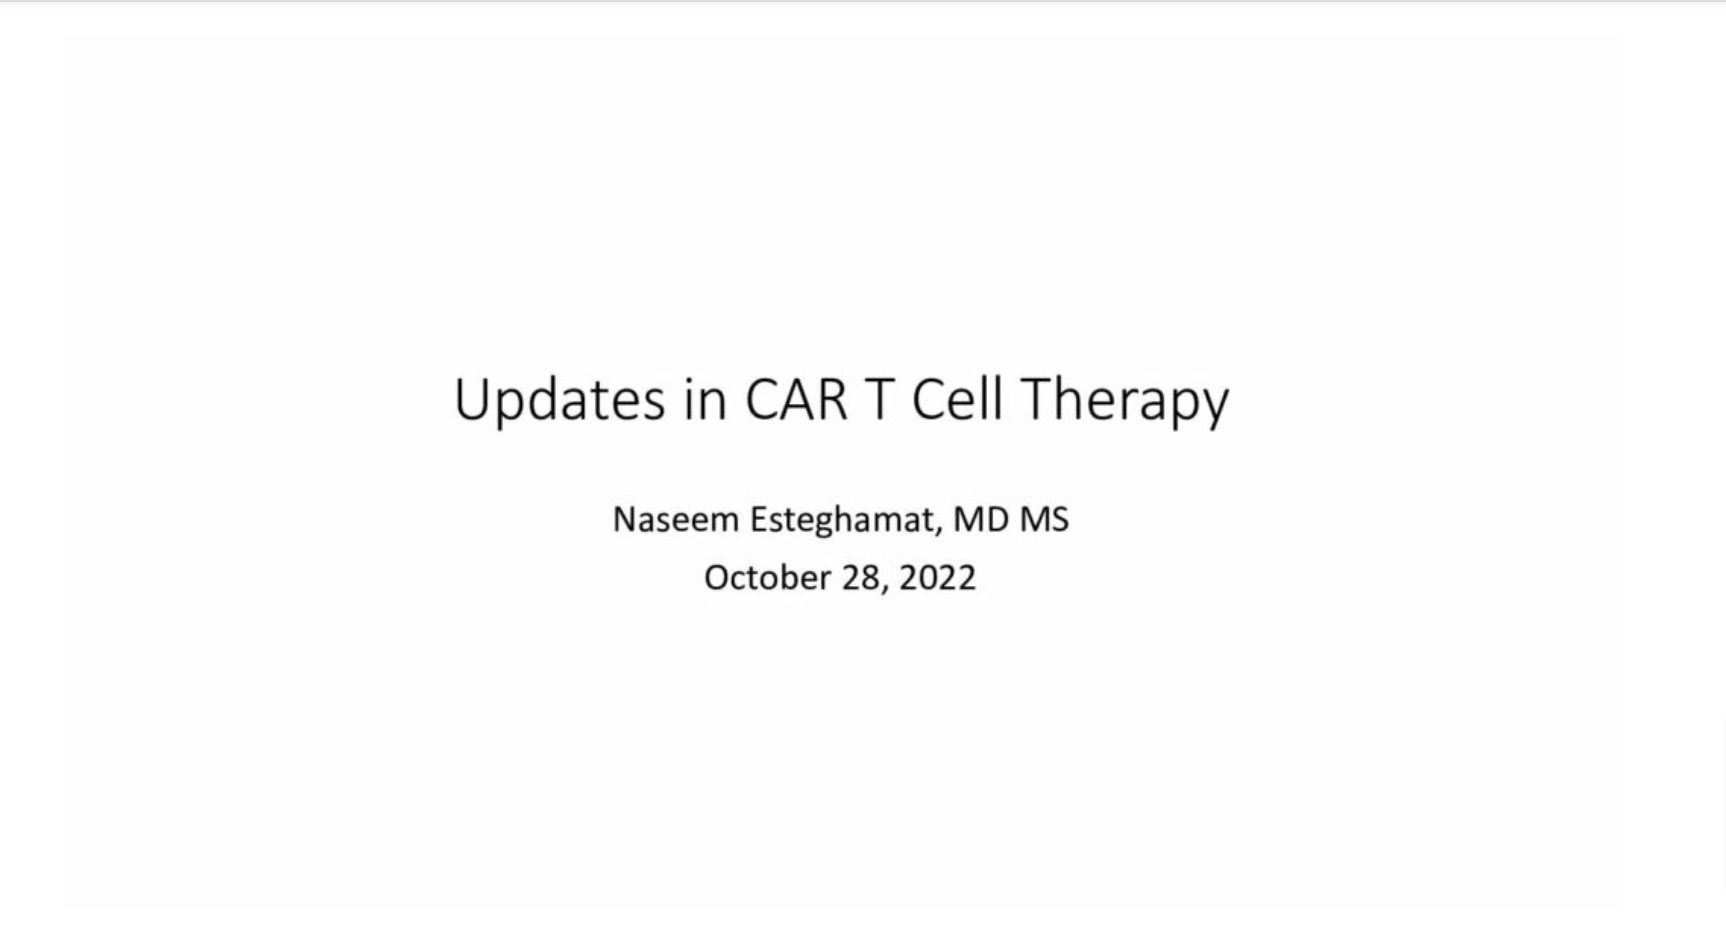 Updates in CAR T Therapies